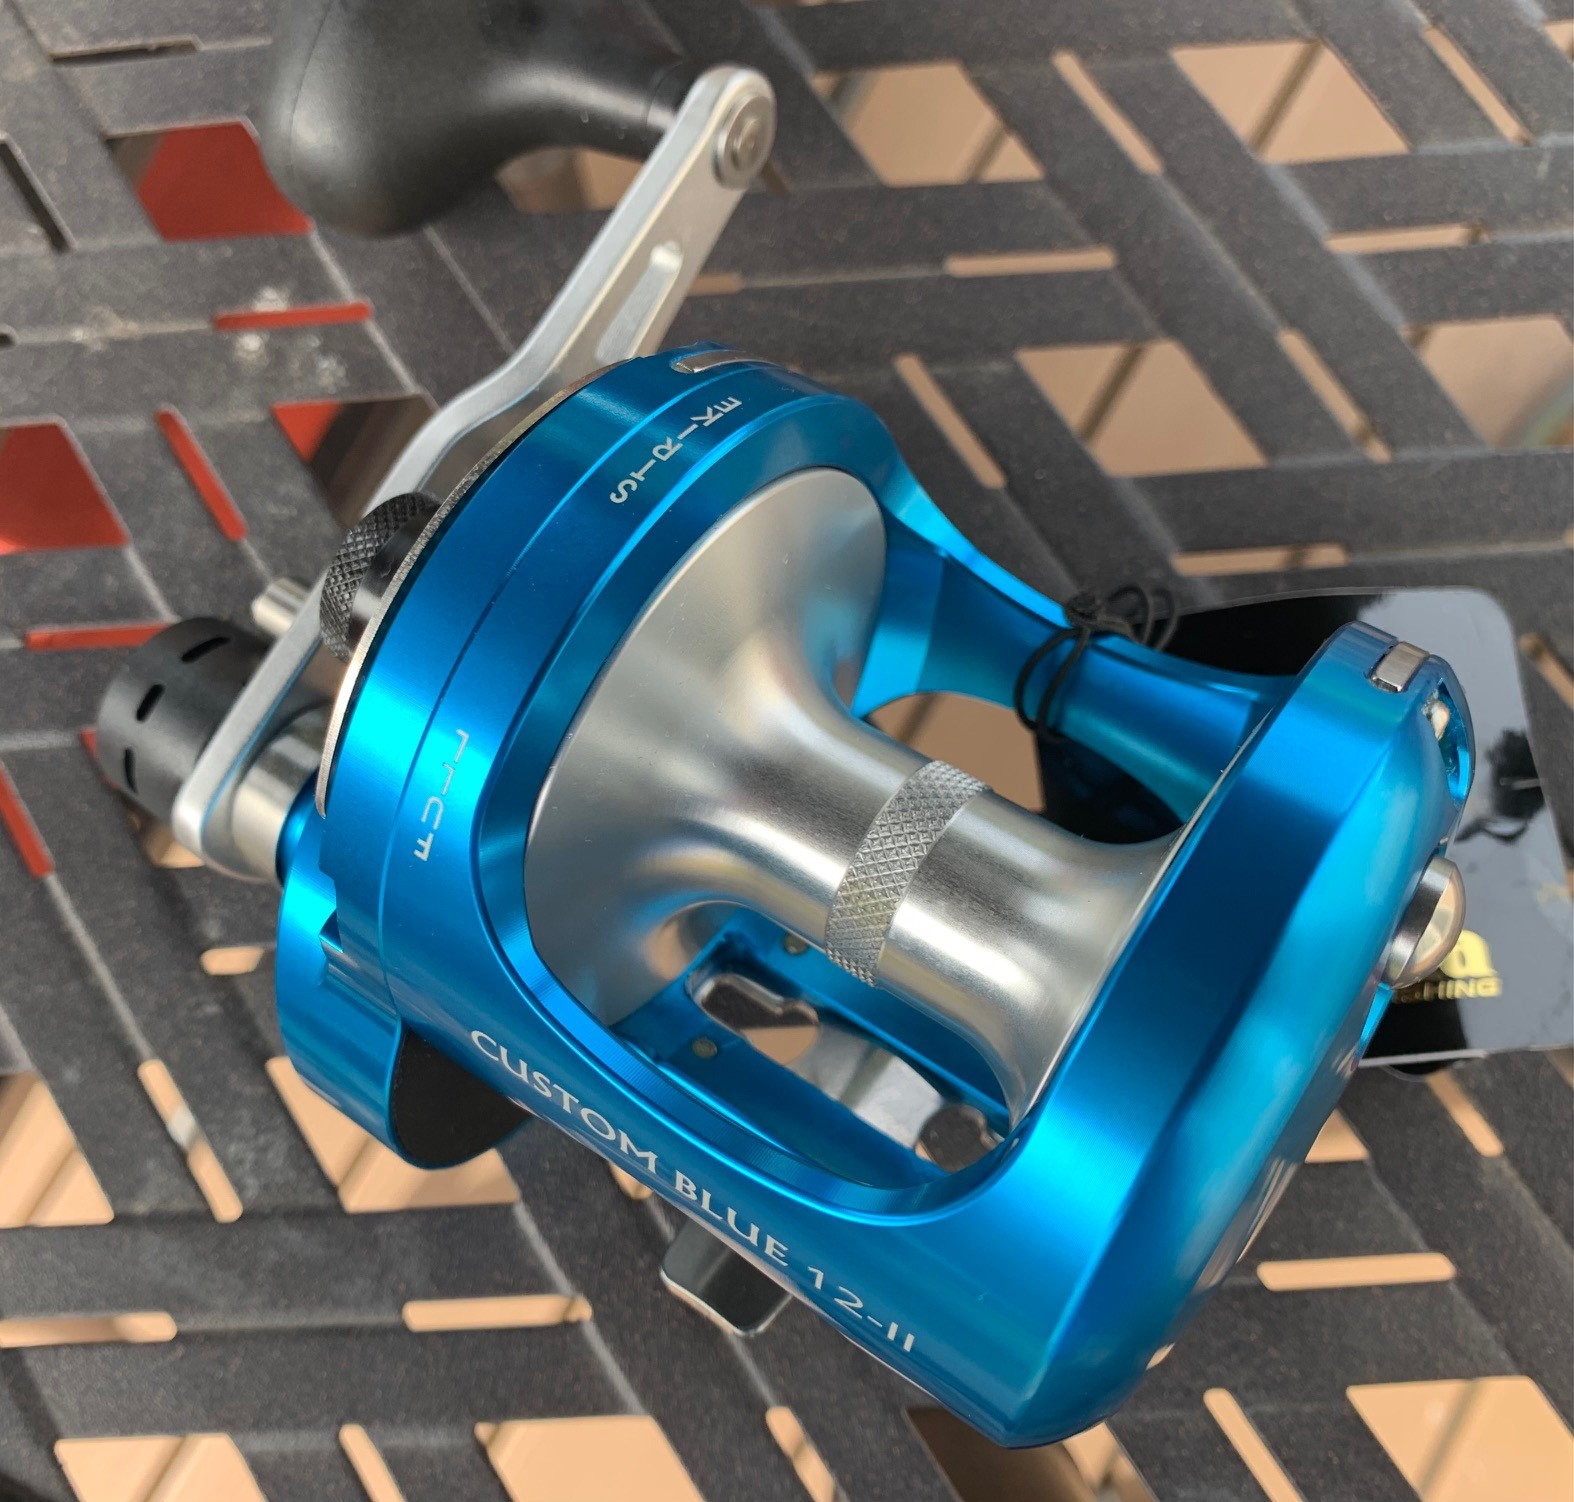 Pretty okuma reel deal - The Hull Truth - Boating and Fishing Forum